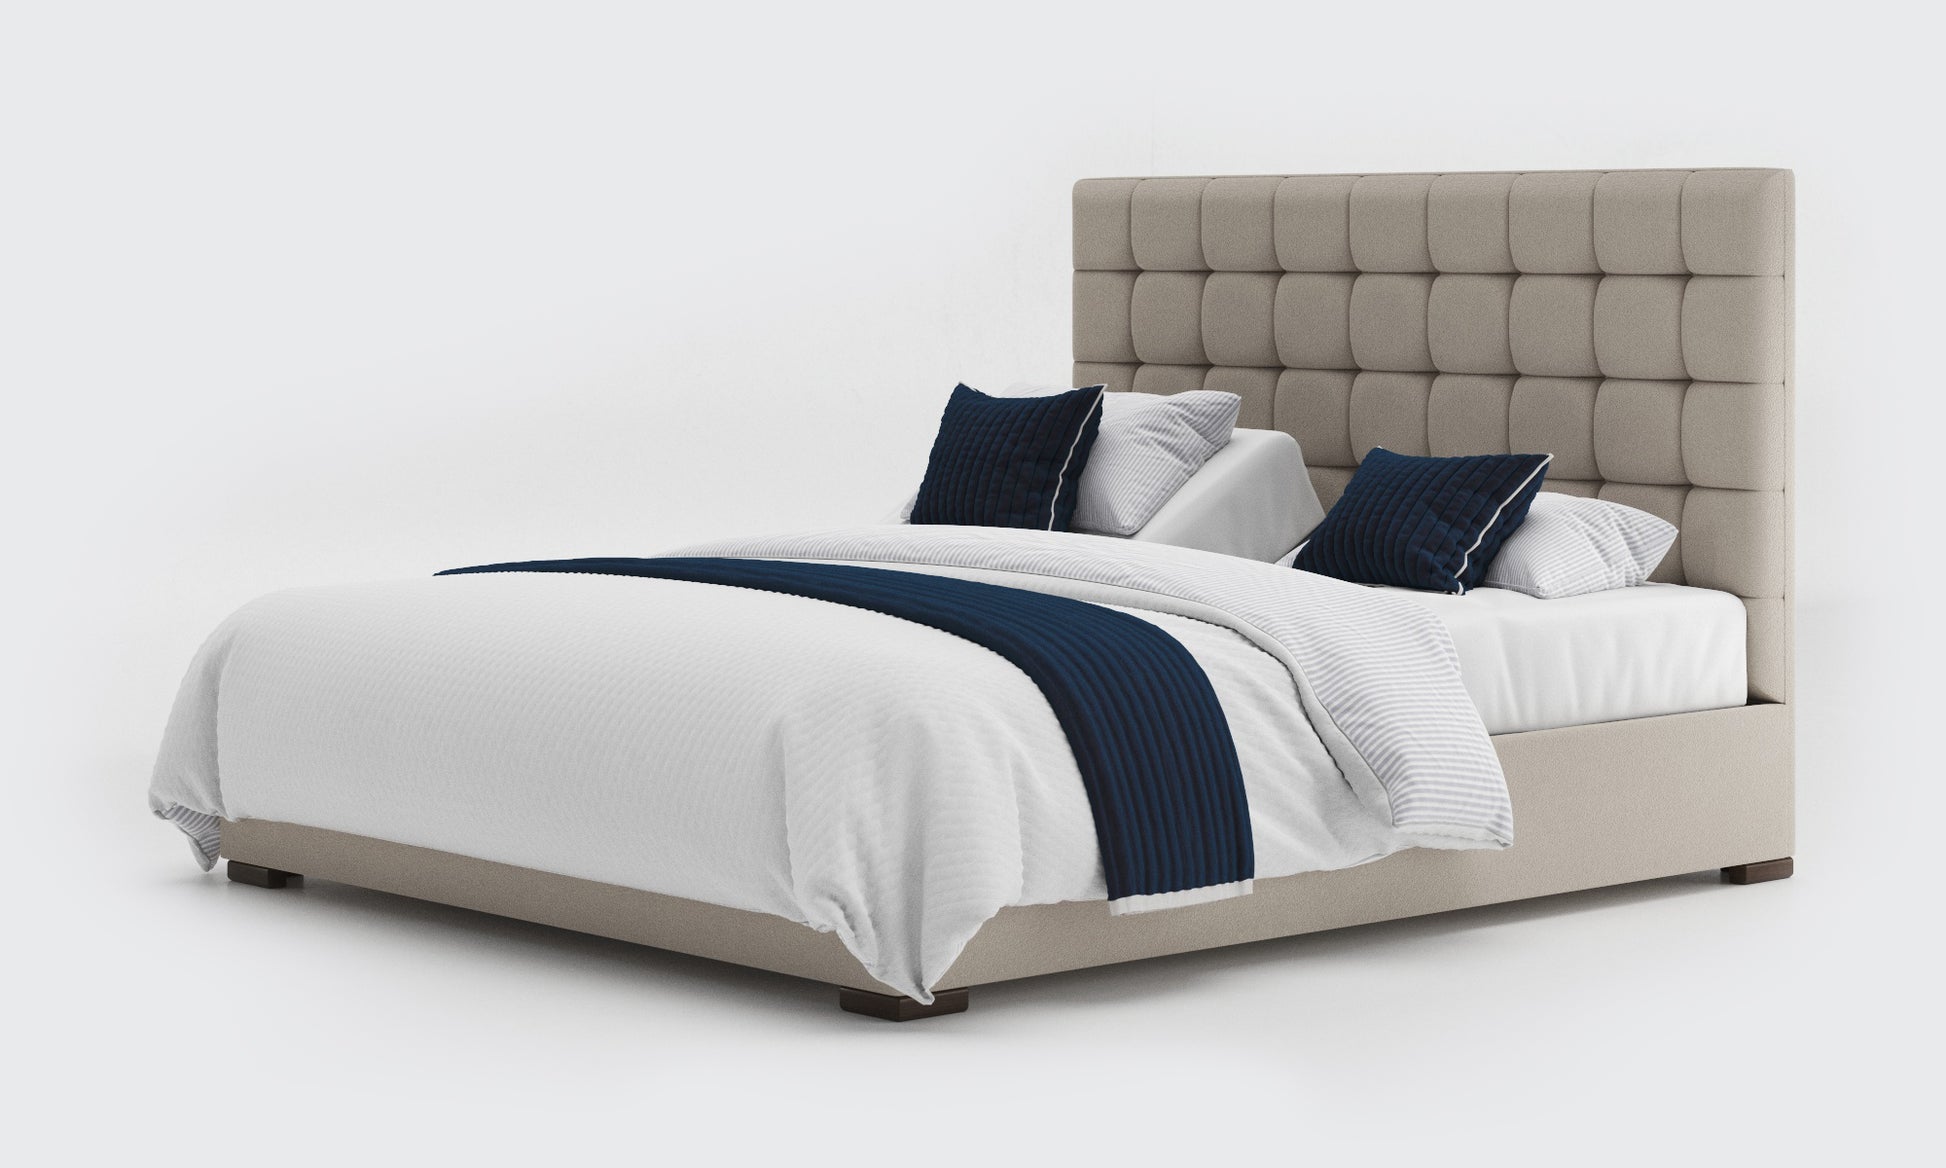 stratton 6ft supper king dual bed and mattresses in the linen material